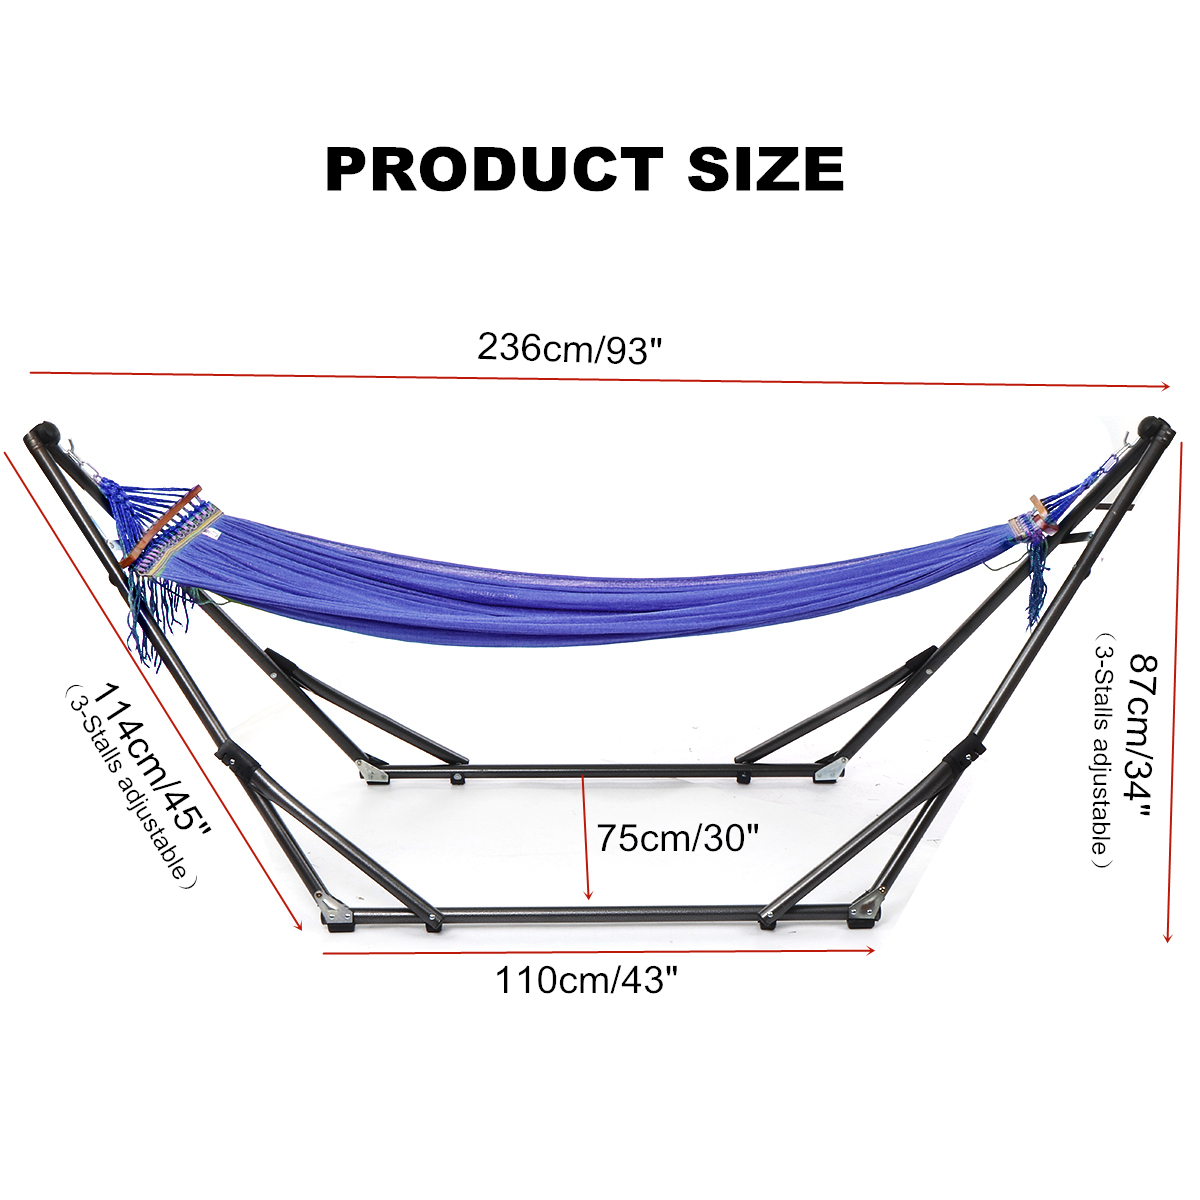 Portable Canvas Hammock Stand Portable Multifunctional Practical Outdoor Garden Swing Hammock Single Hanging Chair Bed Leisure Camping Travel 26